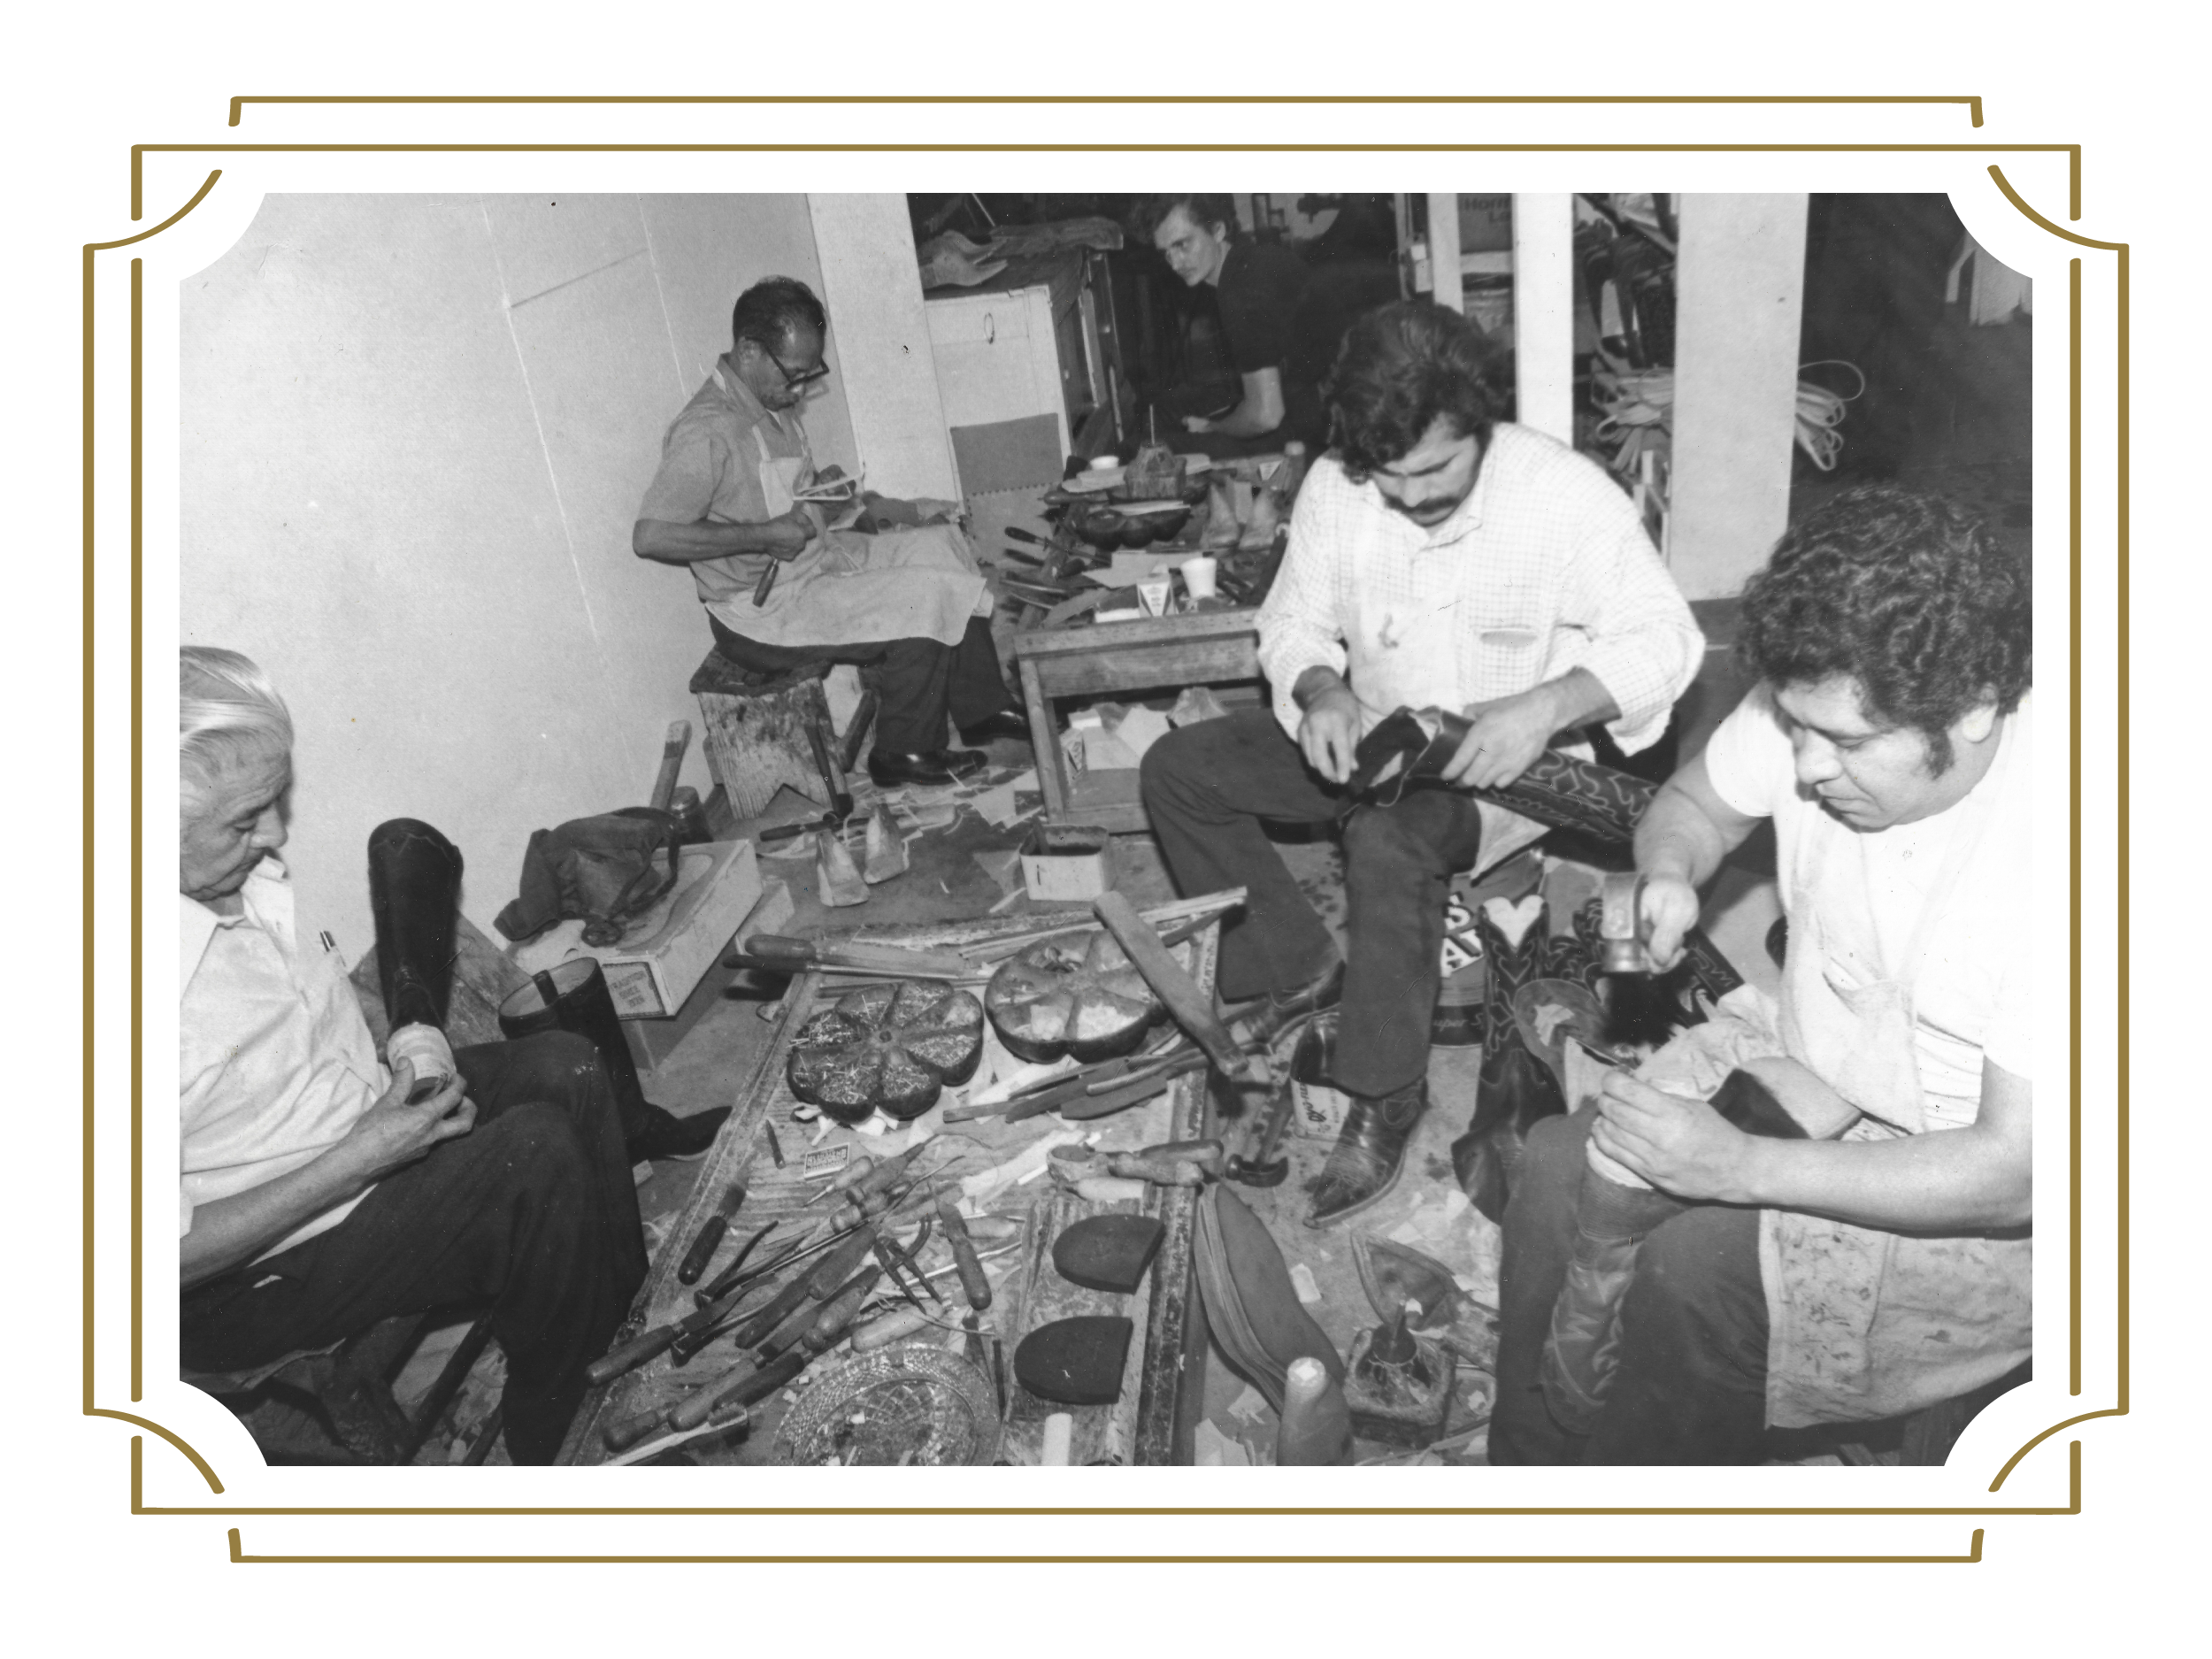 A black-and-white photo of four men seated in a workshop, crafting custom handmade cowboy boots using various tools and materials around them.